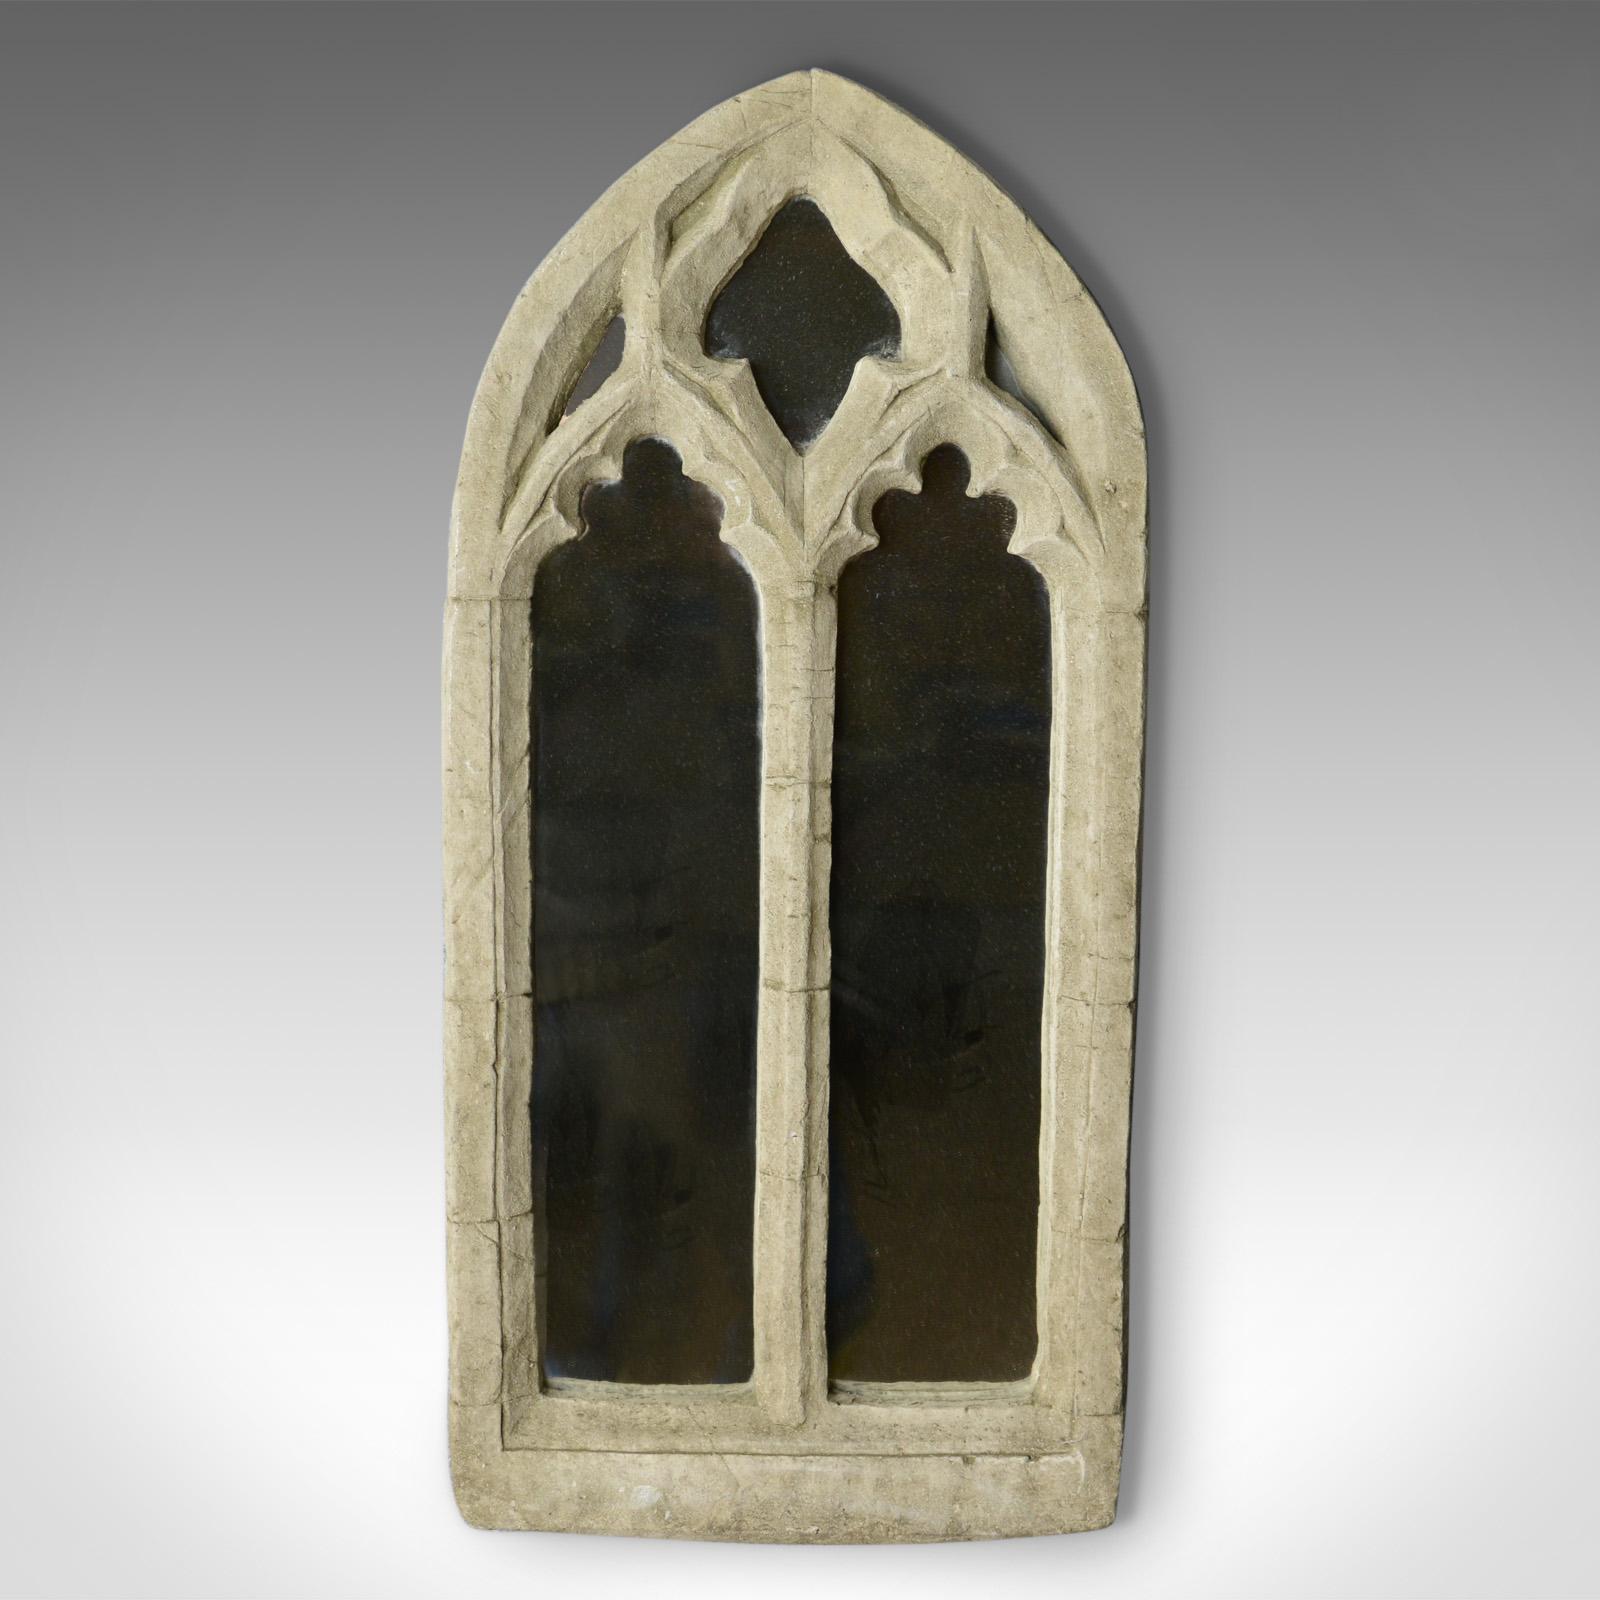 This is a vintage wall mirror, a Pugin-esque, Gothic Revival composite stone frame with ecclesiastical overtones dating to the mid 20th century.

Heavy composite stone frame
Quality mirror plate
Of quality composite stone 
Five apertures with